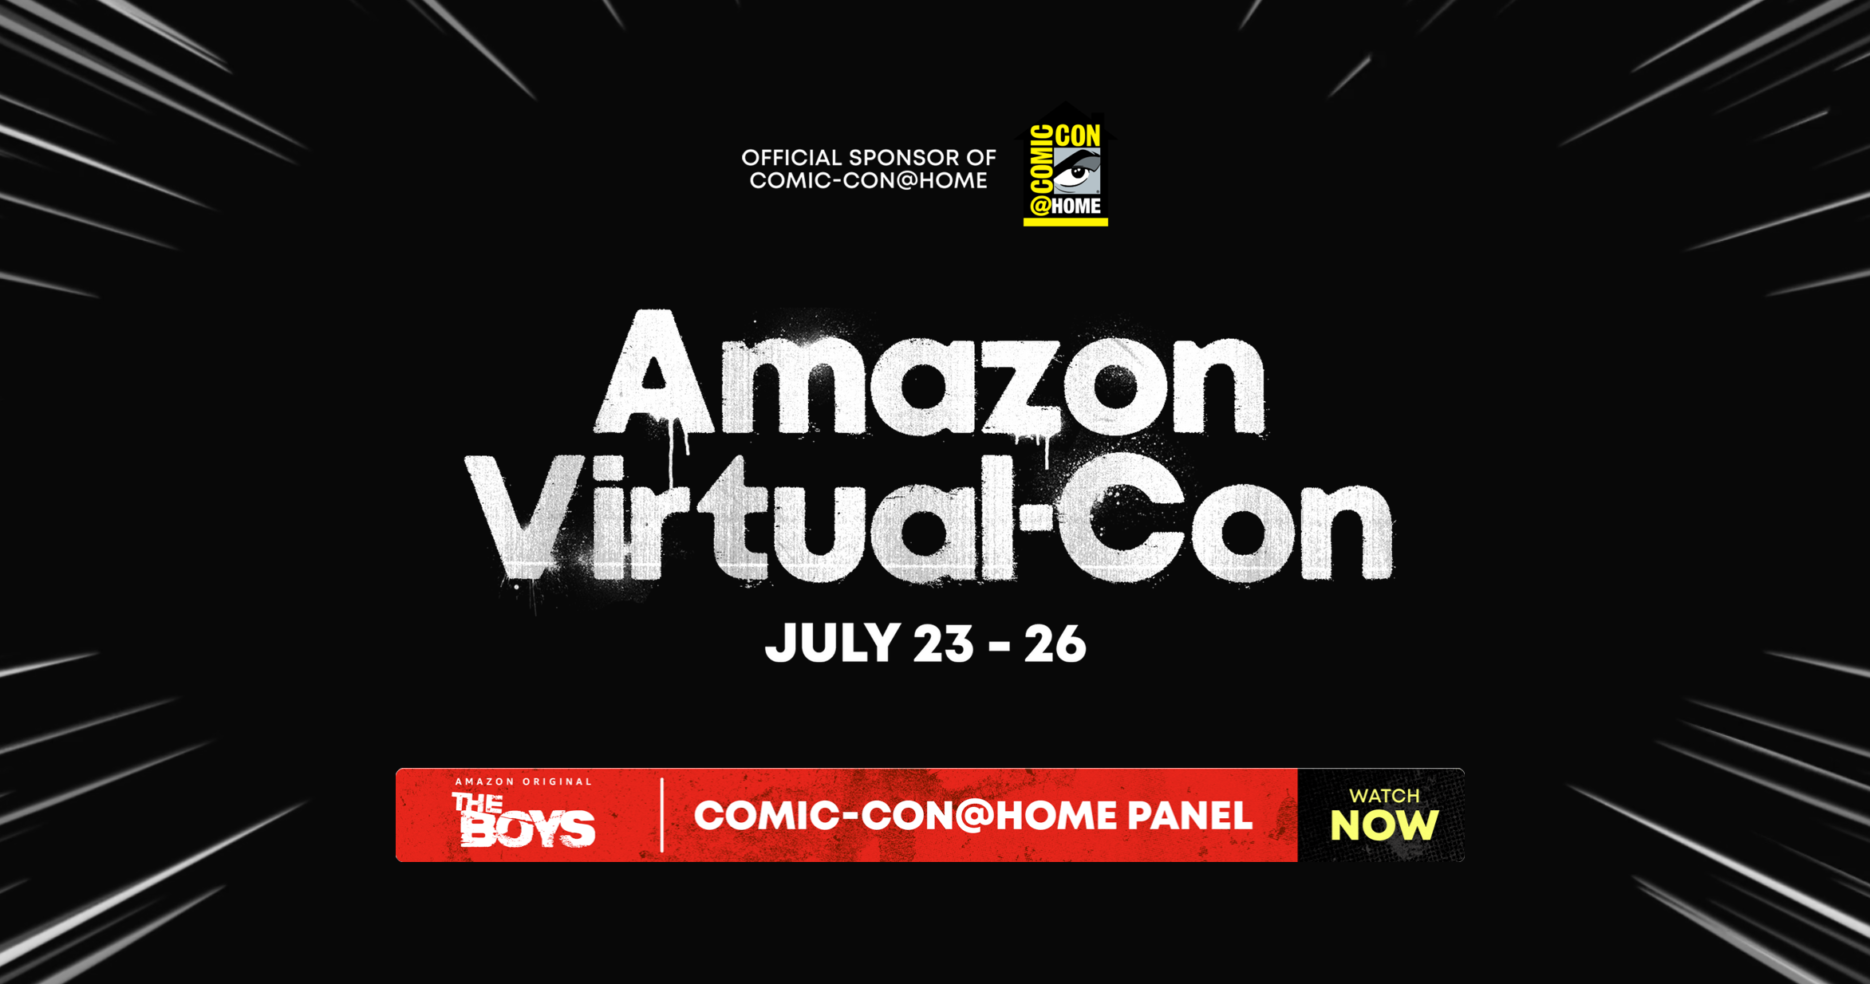 Screen cap from the Amazon Virtual-Con mini-site. The page has a black background. Text and graphic elements are centered, with streaky speed lines extending from the margins of the image. The text "Amazon Virtual-Con" is designed to look spray painted. It's situated between a more polished "Official Sponsor of Comic-Con@Home" tagline and logo above, and a banner ad inviting viewers to watch a panel about the Prime series The Boys, below.